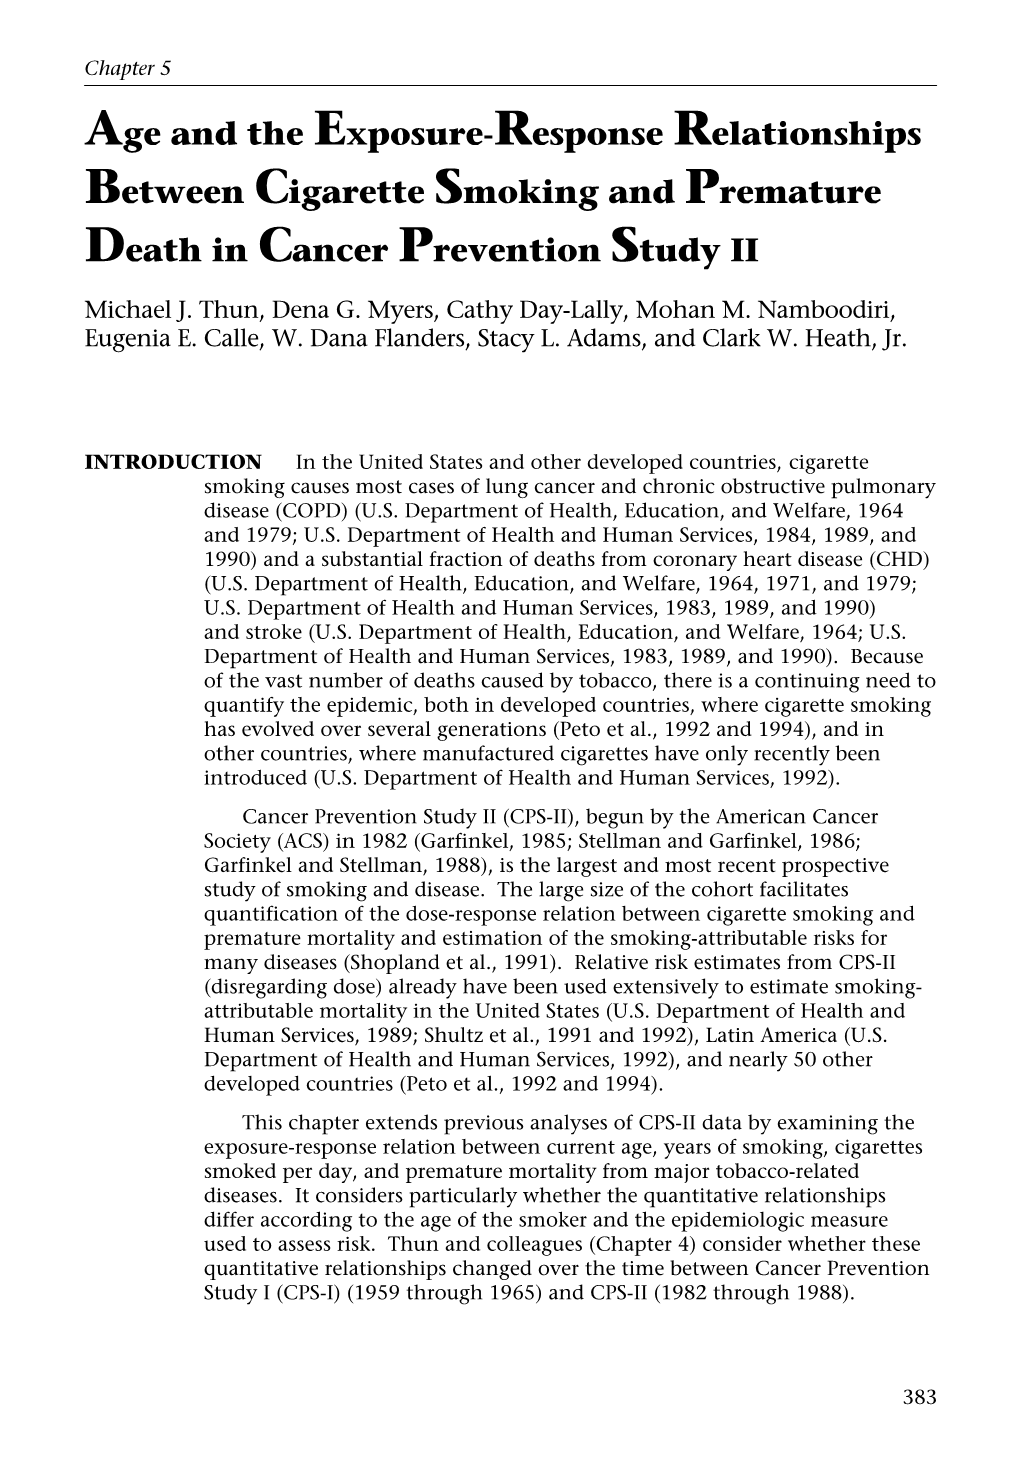 Age and the Exposure-Response Relationships Between Cigarette Smoking and Premature Death in Cancer Prevention Study II